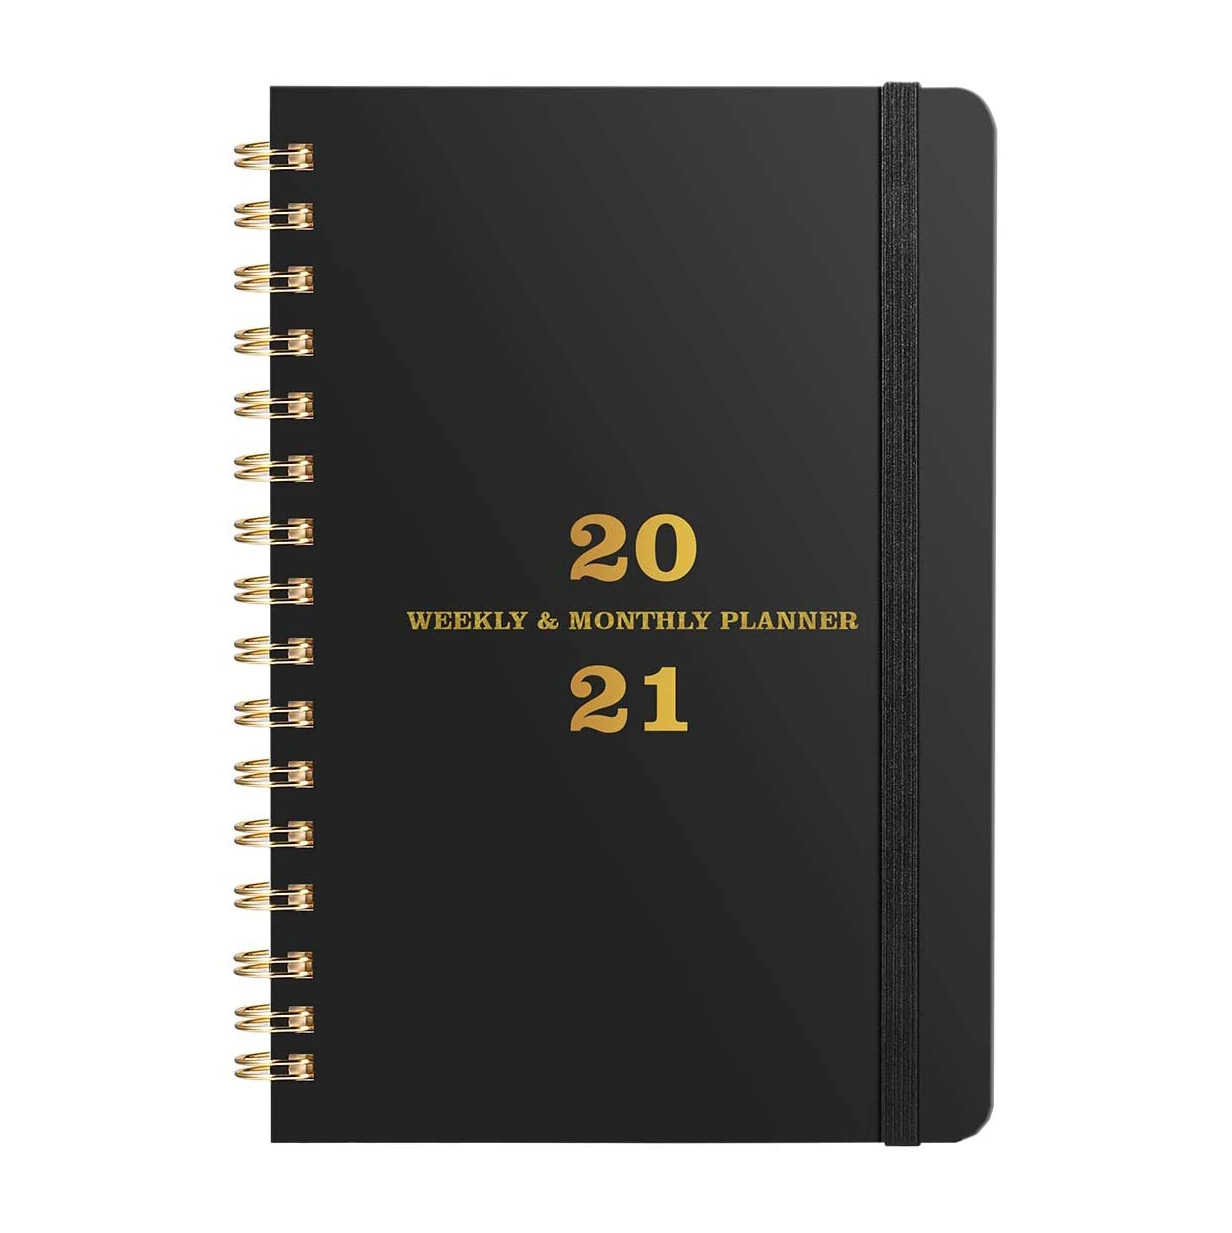 Custom Design Spiral 2021 Planners Hot Golden Foil Hardcover Journal Monthly Weekly Daily Agenda Printing Service A4 A5 Planner